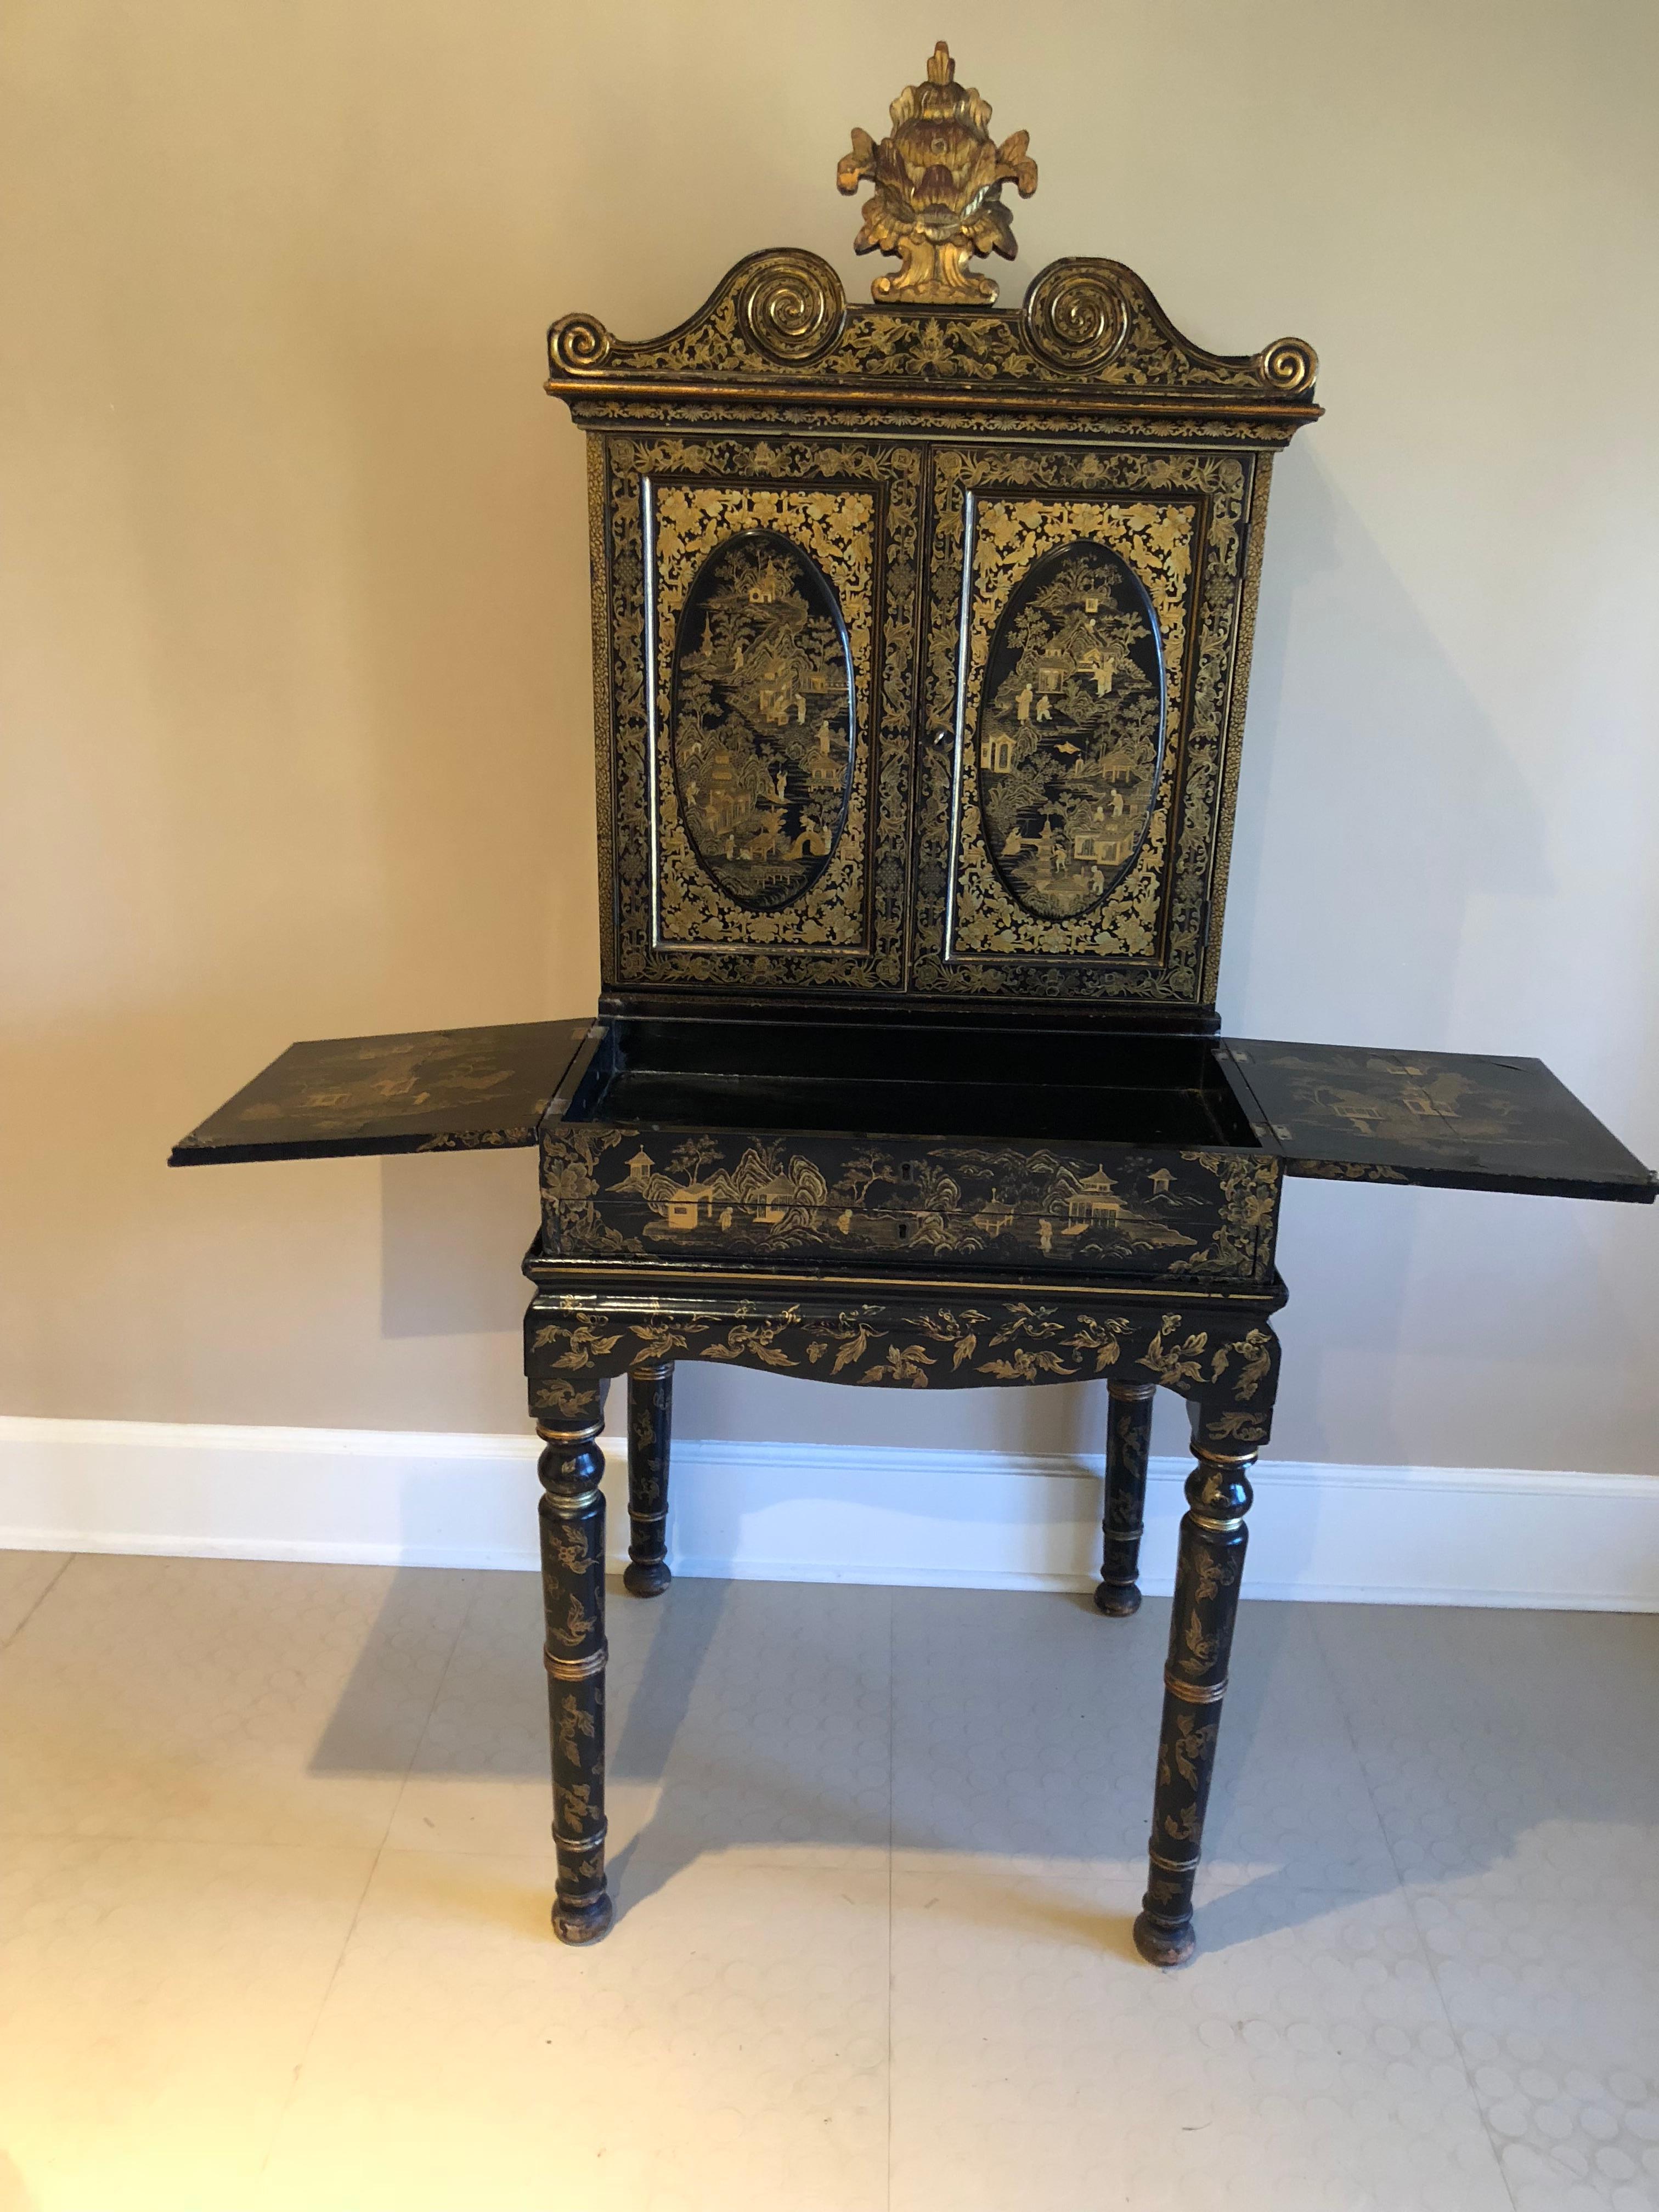 Exquisite Antique Chinese Export Gilt Decorated Black Lacquer Cabinet on Stand 2